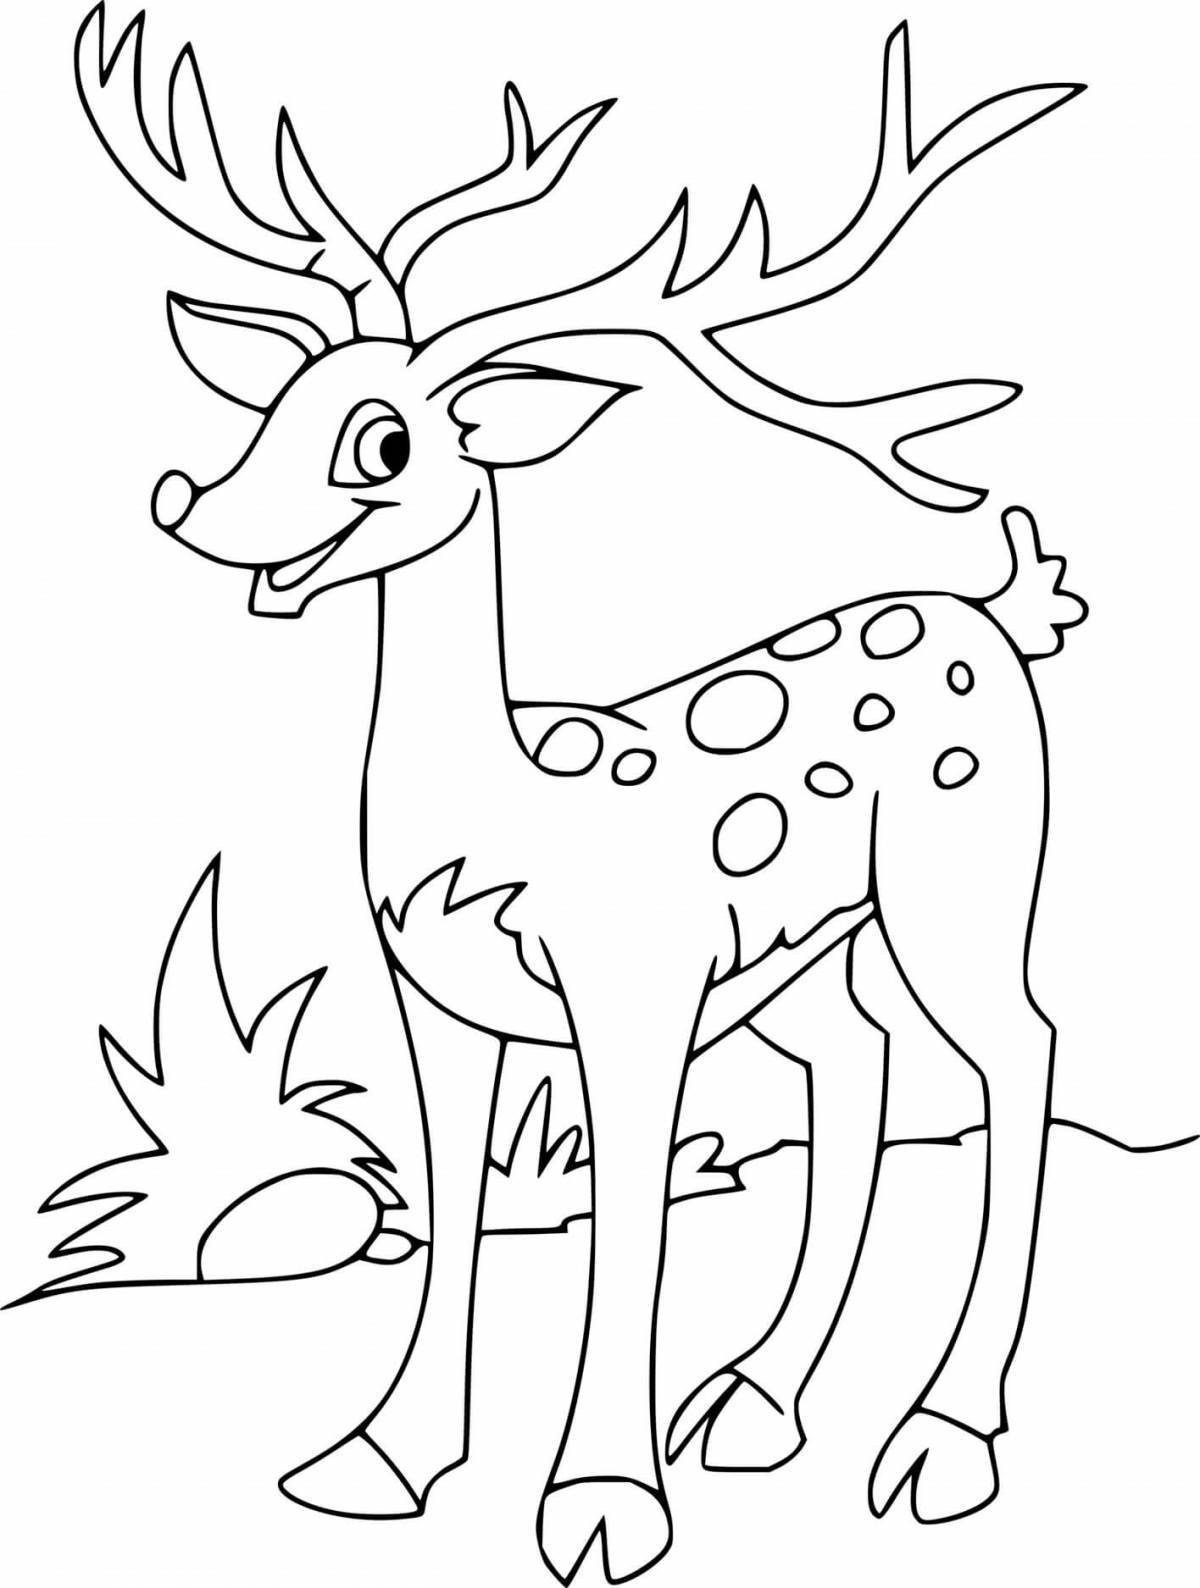 Fine silver hoof coloring page